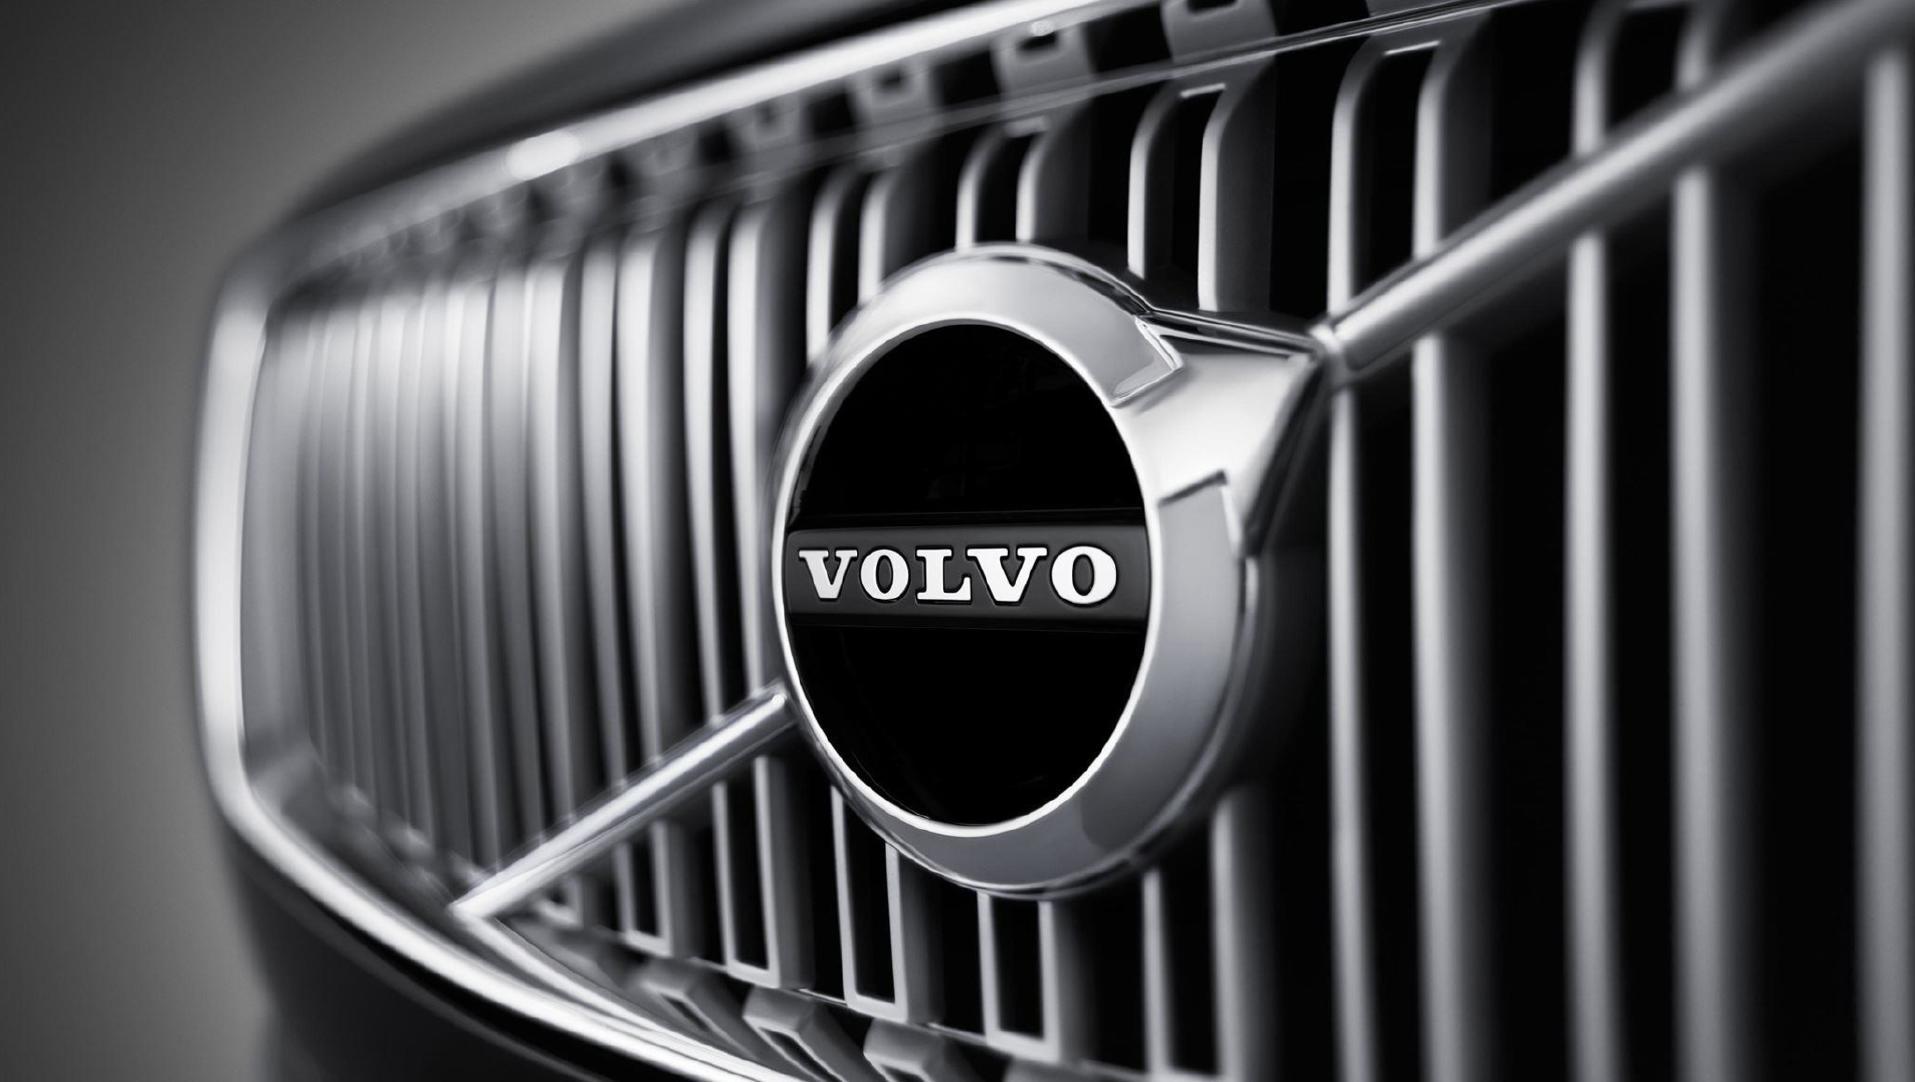 Volvo Xc90 Front Grille 51436 - Volvo Grill Emblem 2018 - HD Wallpaper 